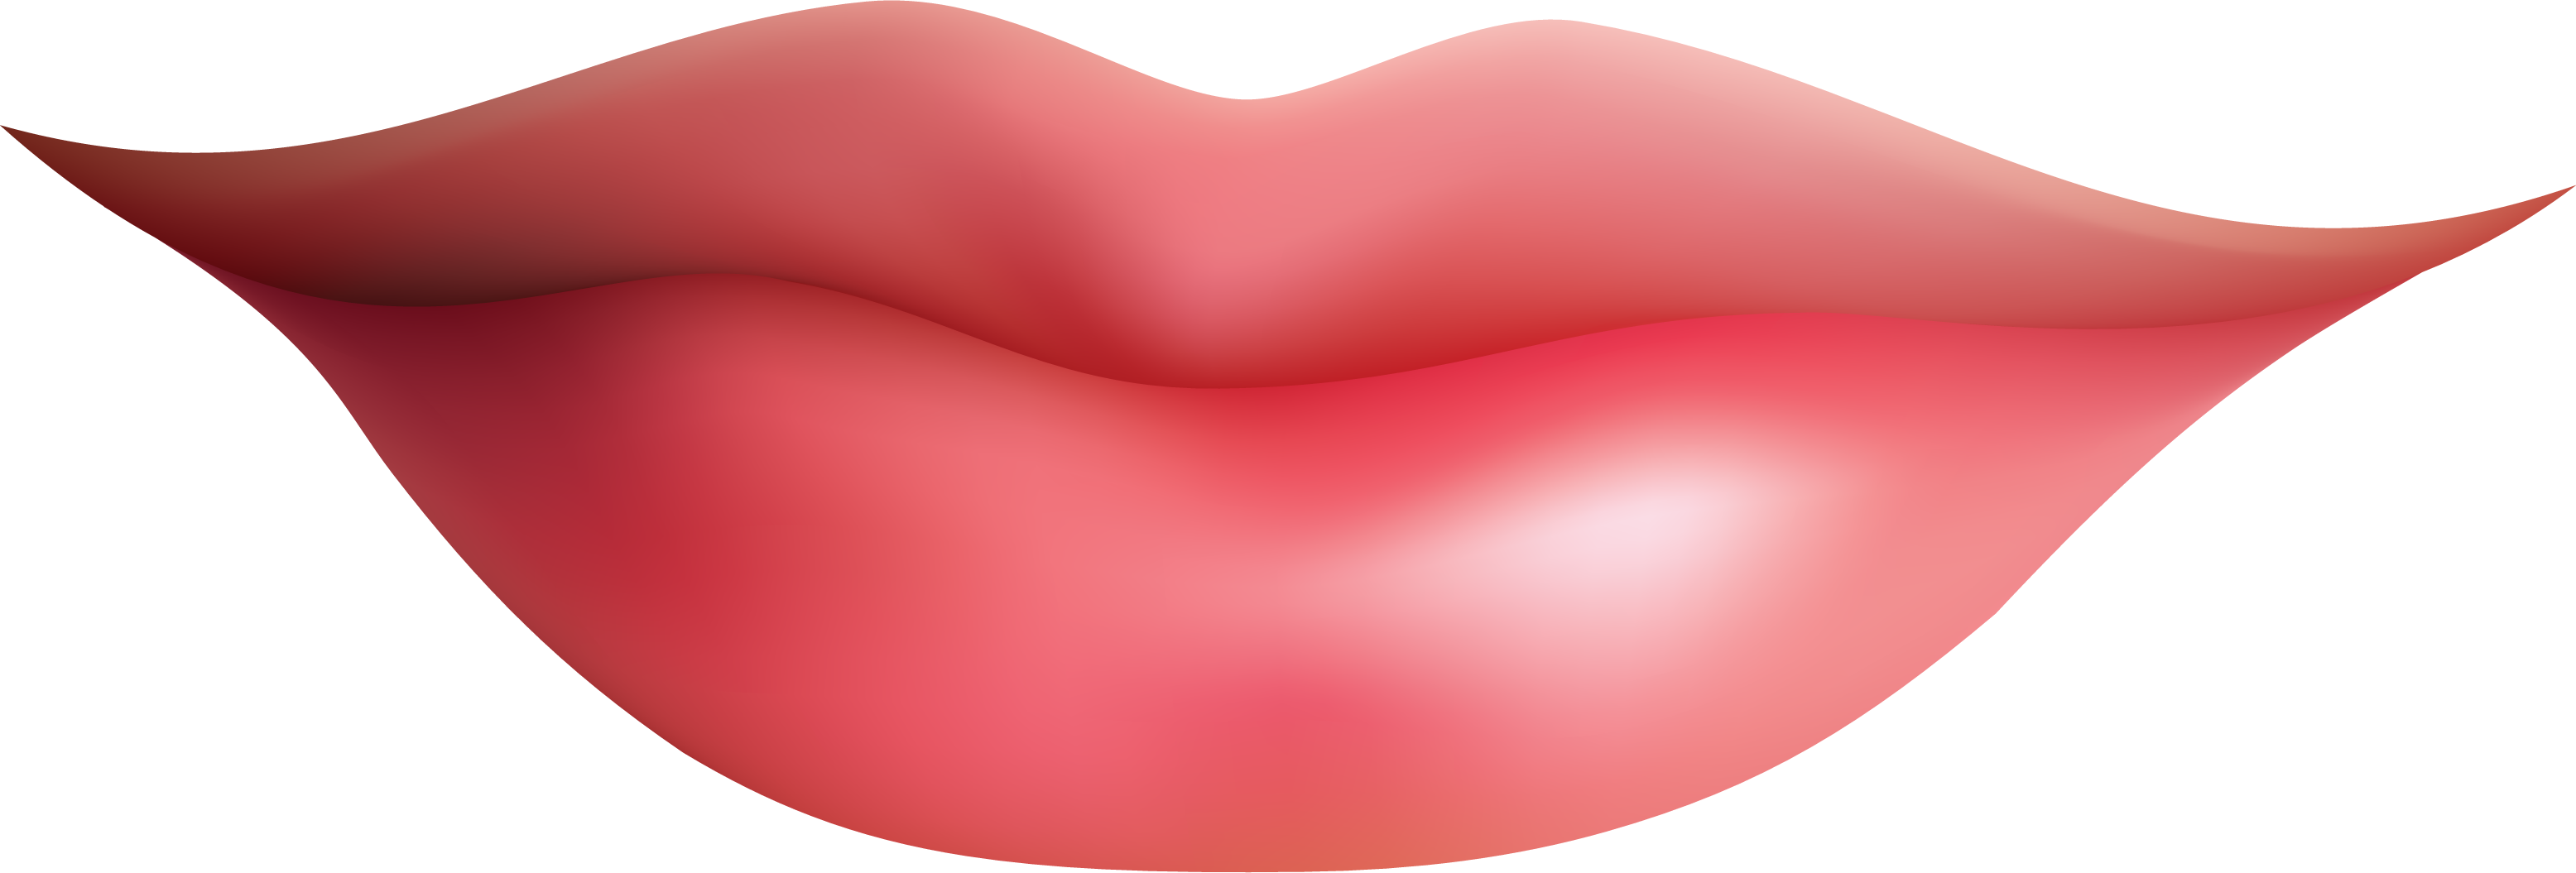 Clipart lips clipart image 9